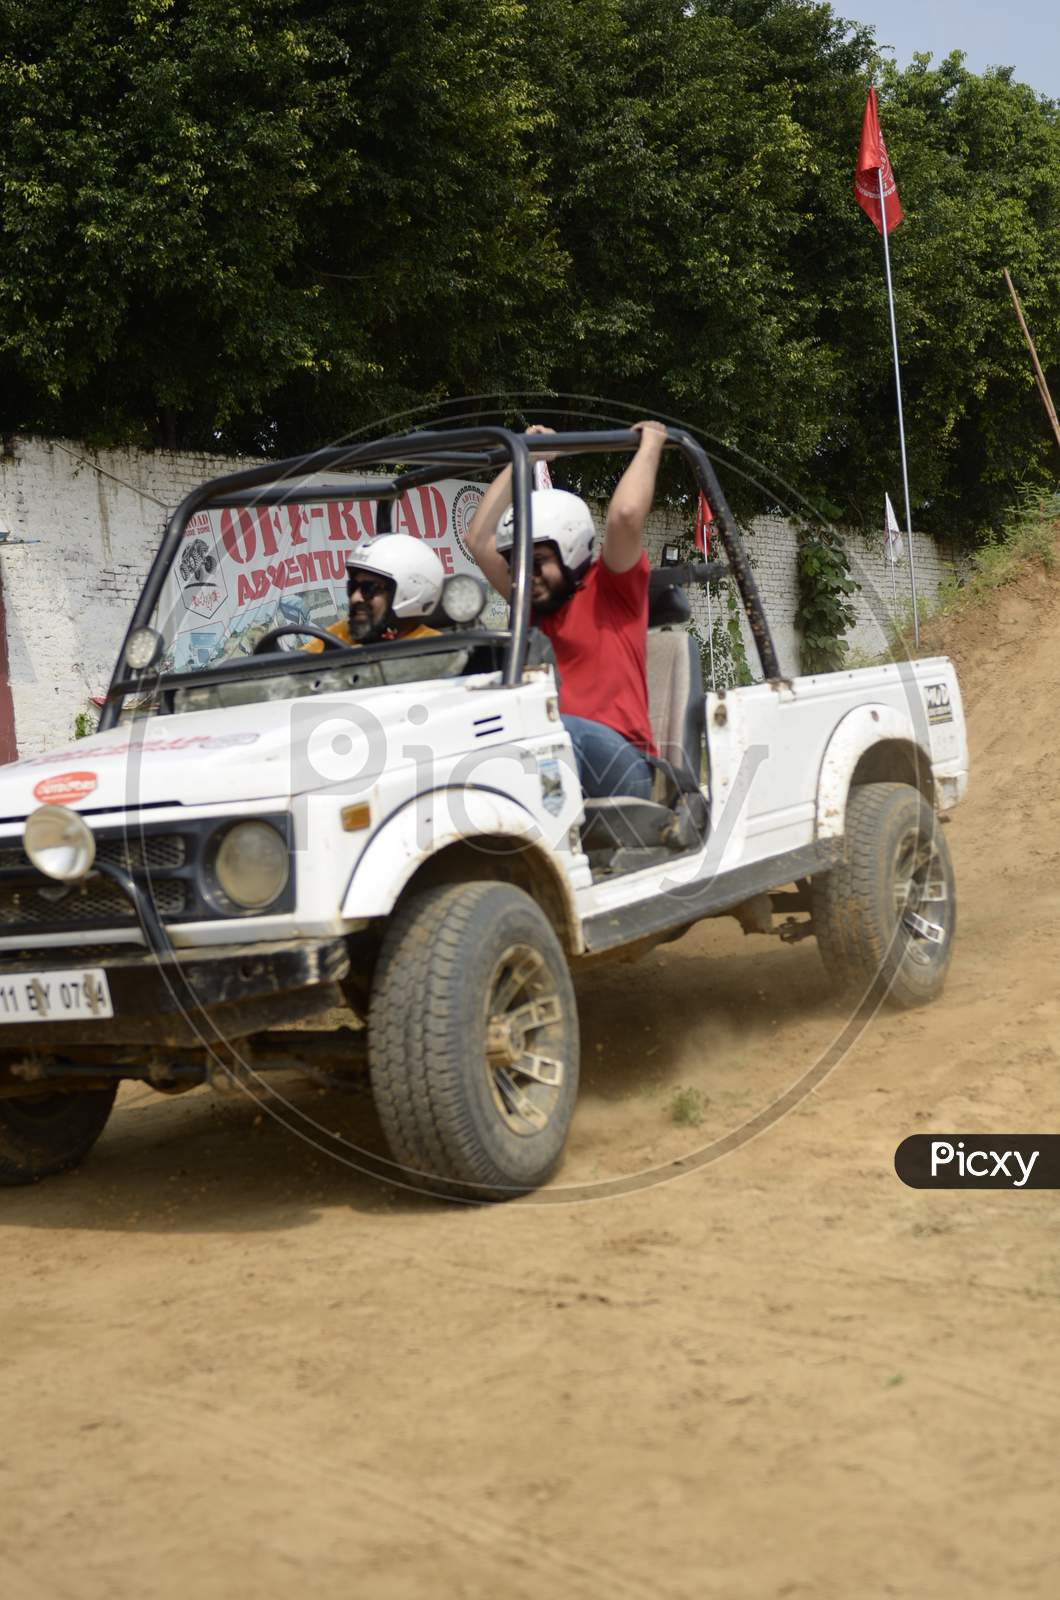 Off-Road Vehicle  in an Rally Championship  With Drifting And Sand and Soil  Splashes on Rally Tracks